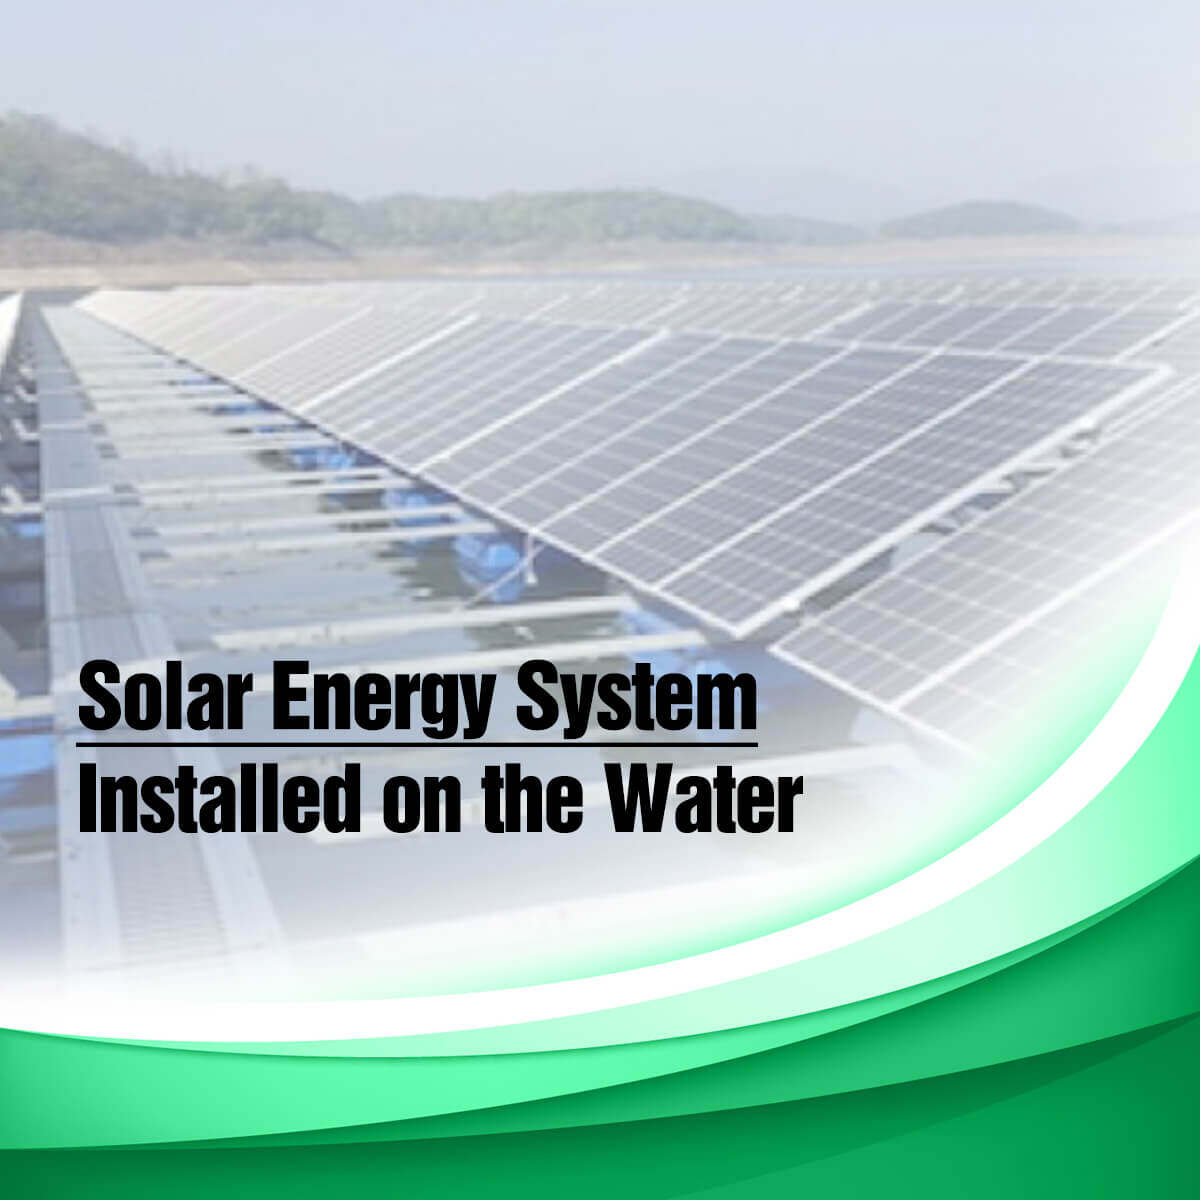 Solar Energy System Installed on the Water